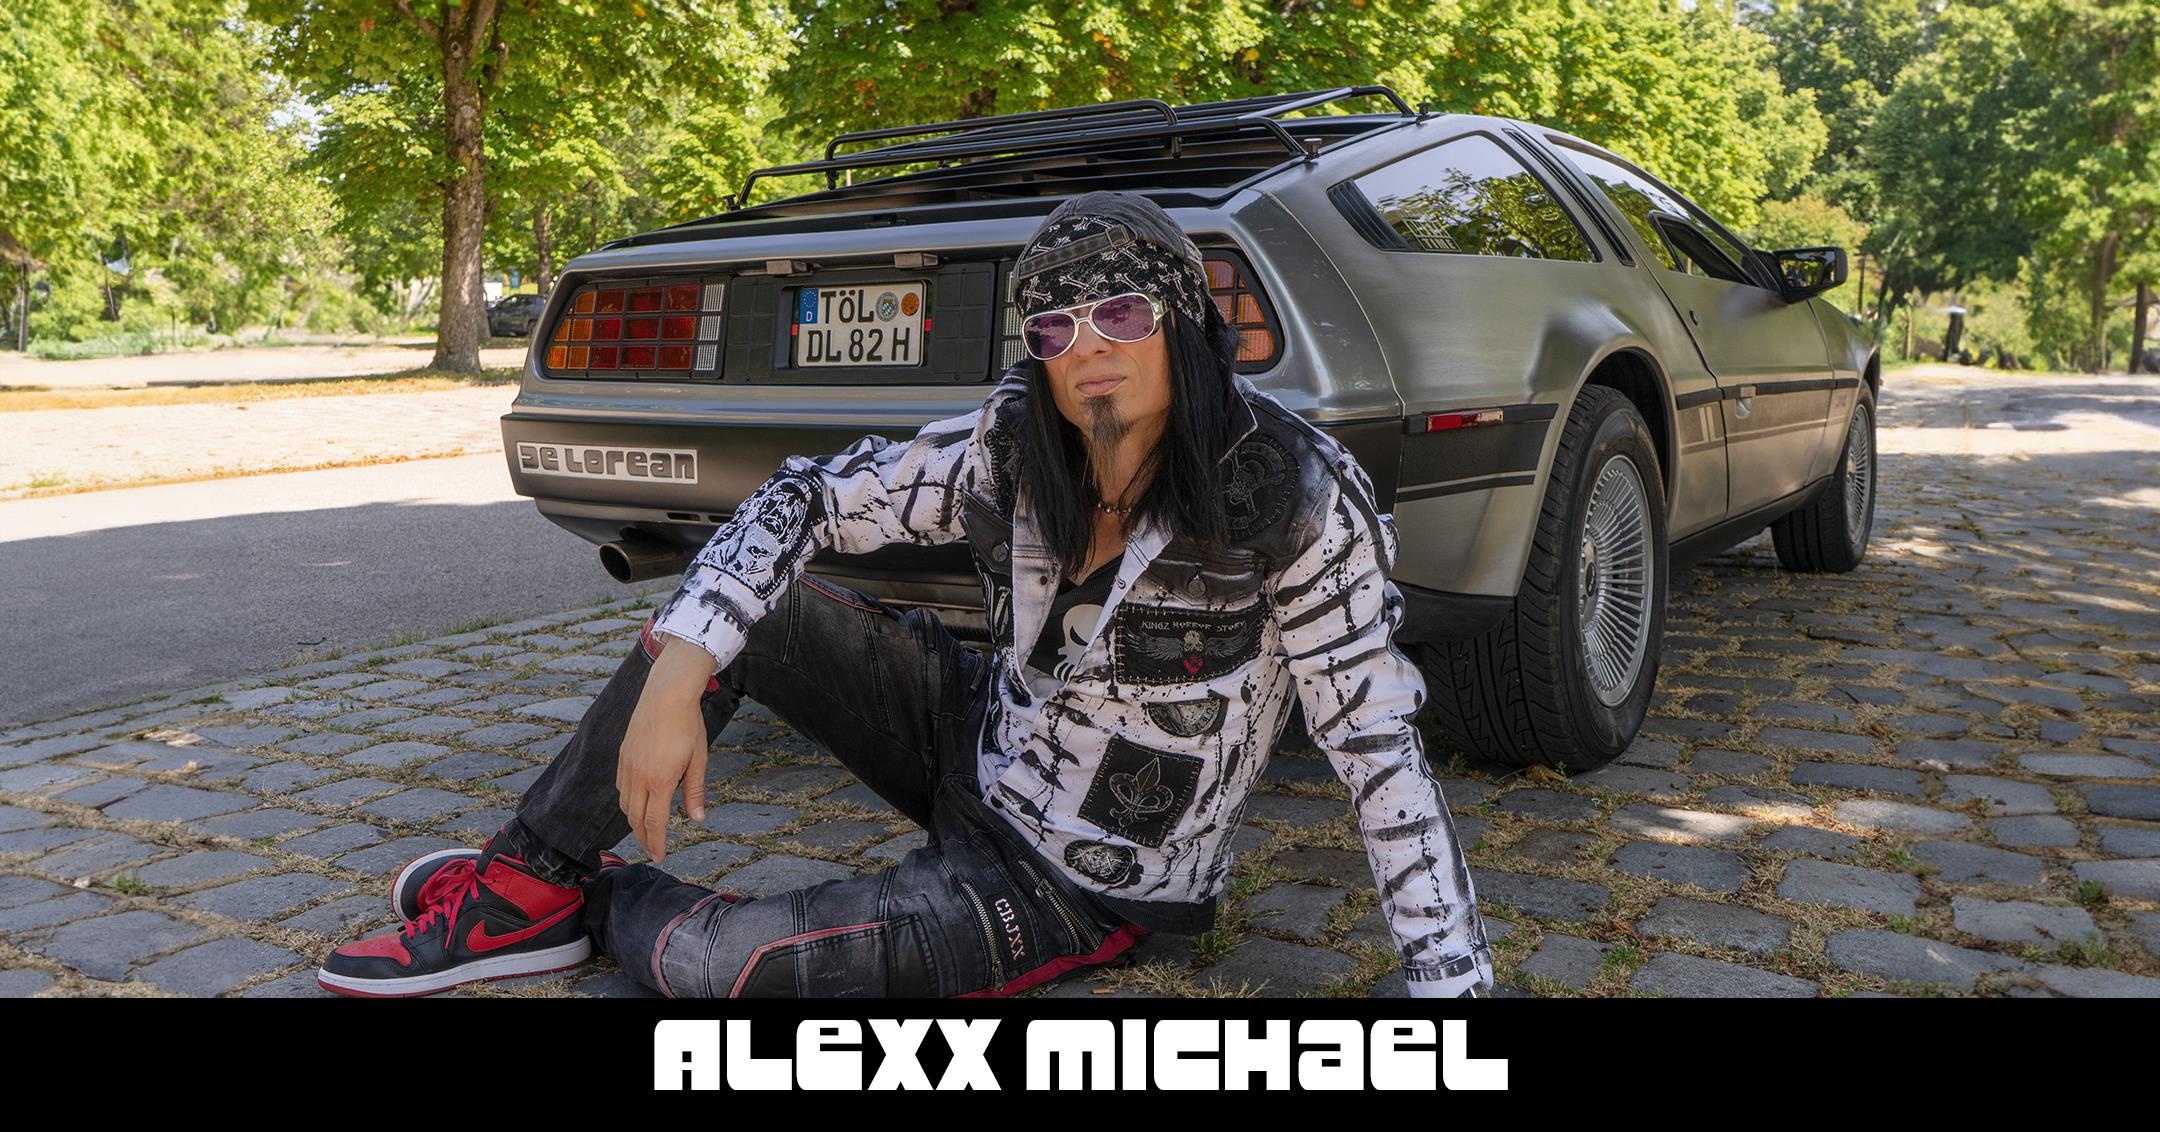 MADZ is STACKED on X: Live streaming the finale of the Delorean